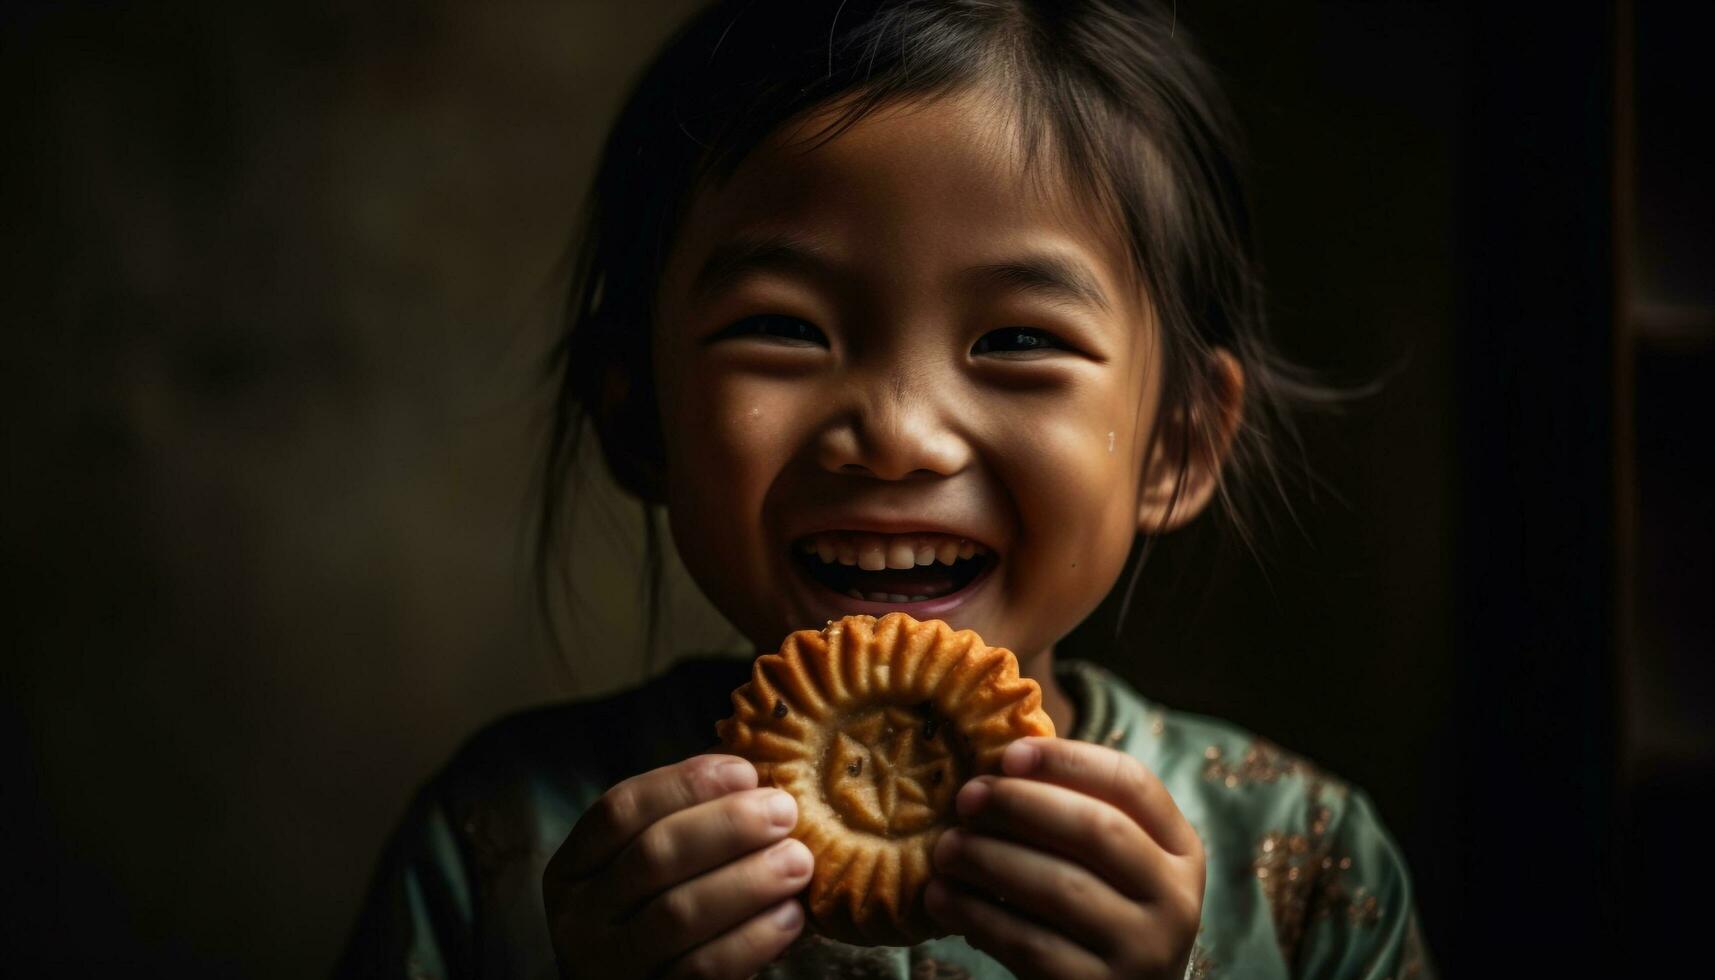 One cute girl holding a cookie, looking at camera joyfully generated by AI photo